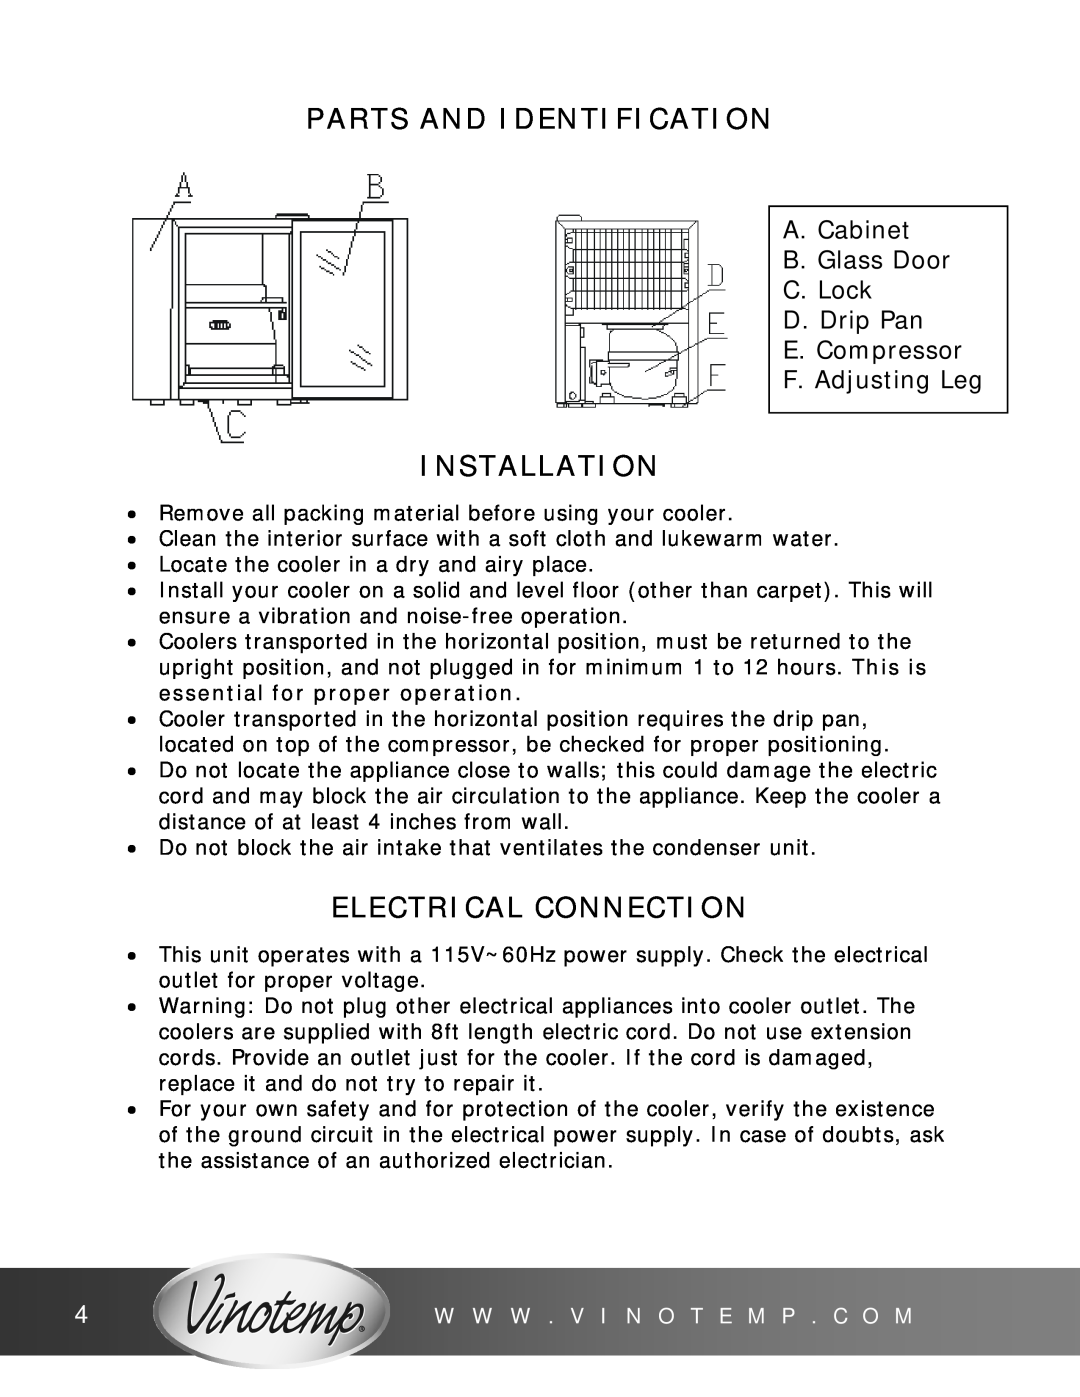 Vinotemp VT-SC-1 owner manual Parts And Identification, Installation, Electrical Connection, F. Adjusting Leg 